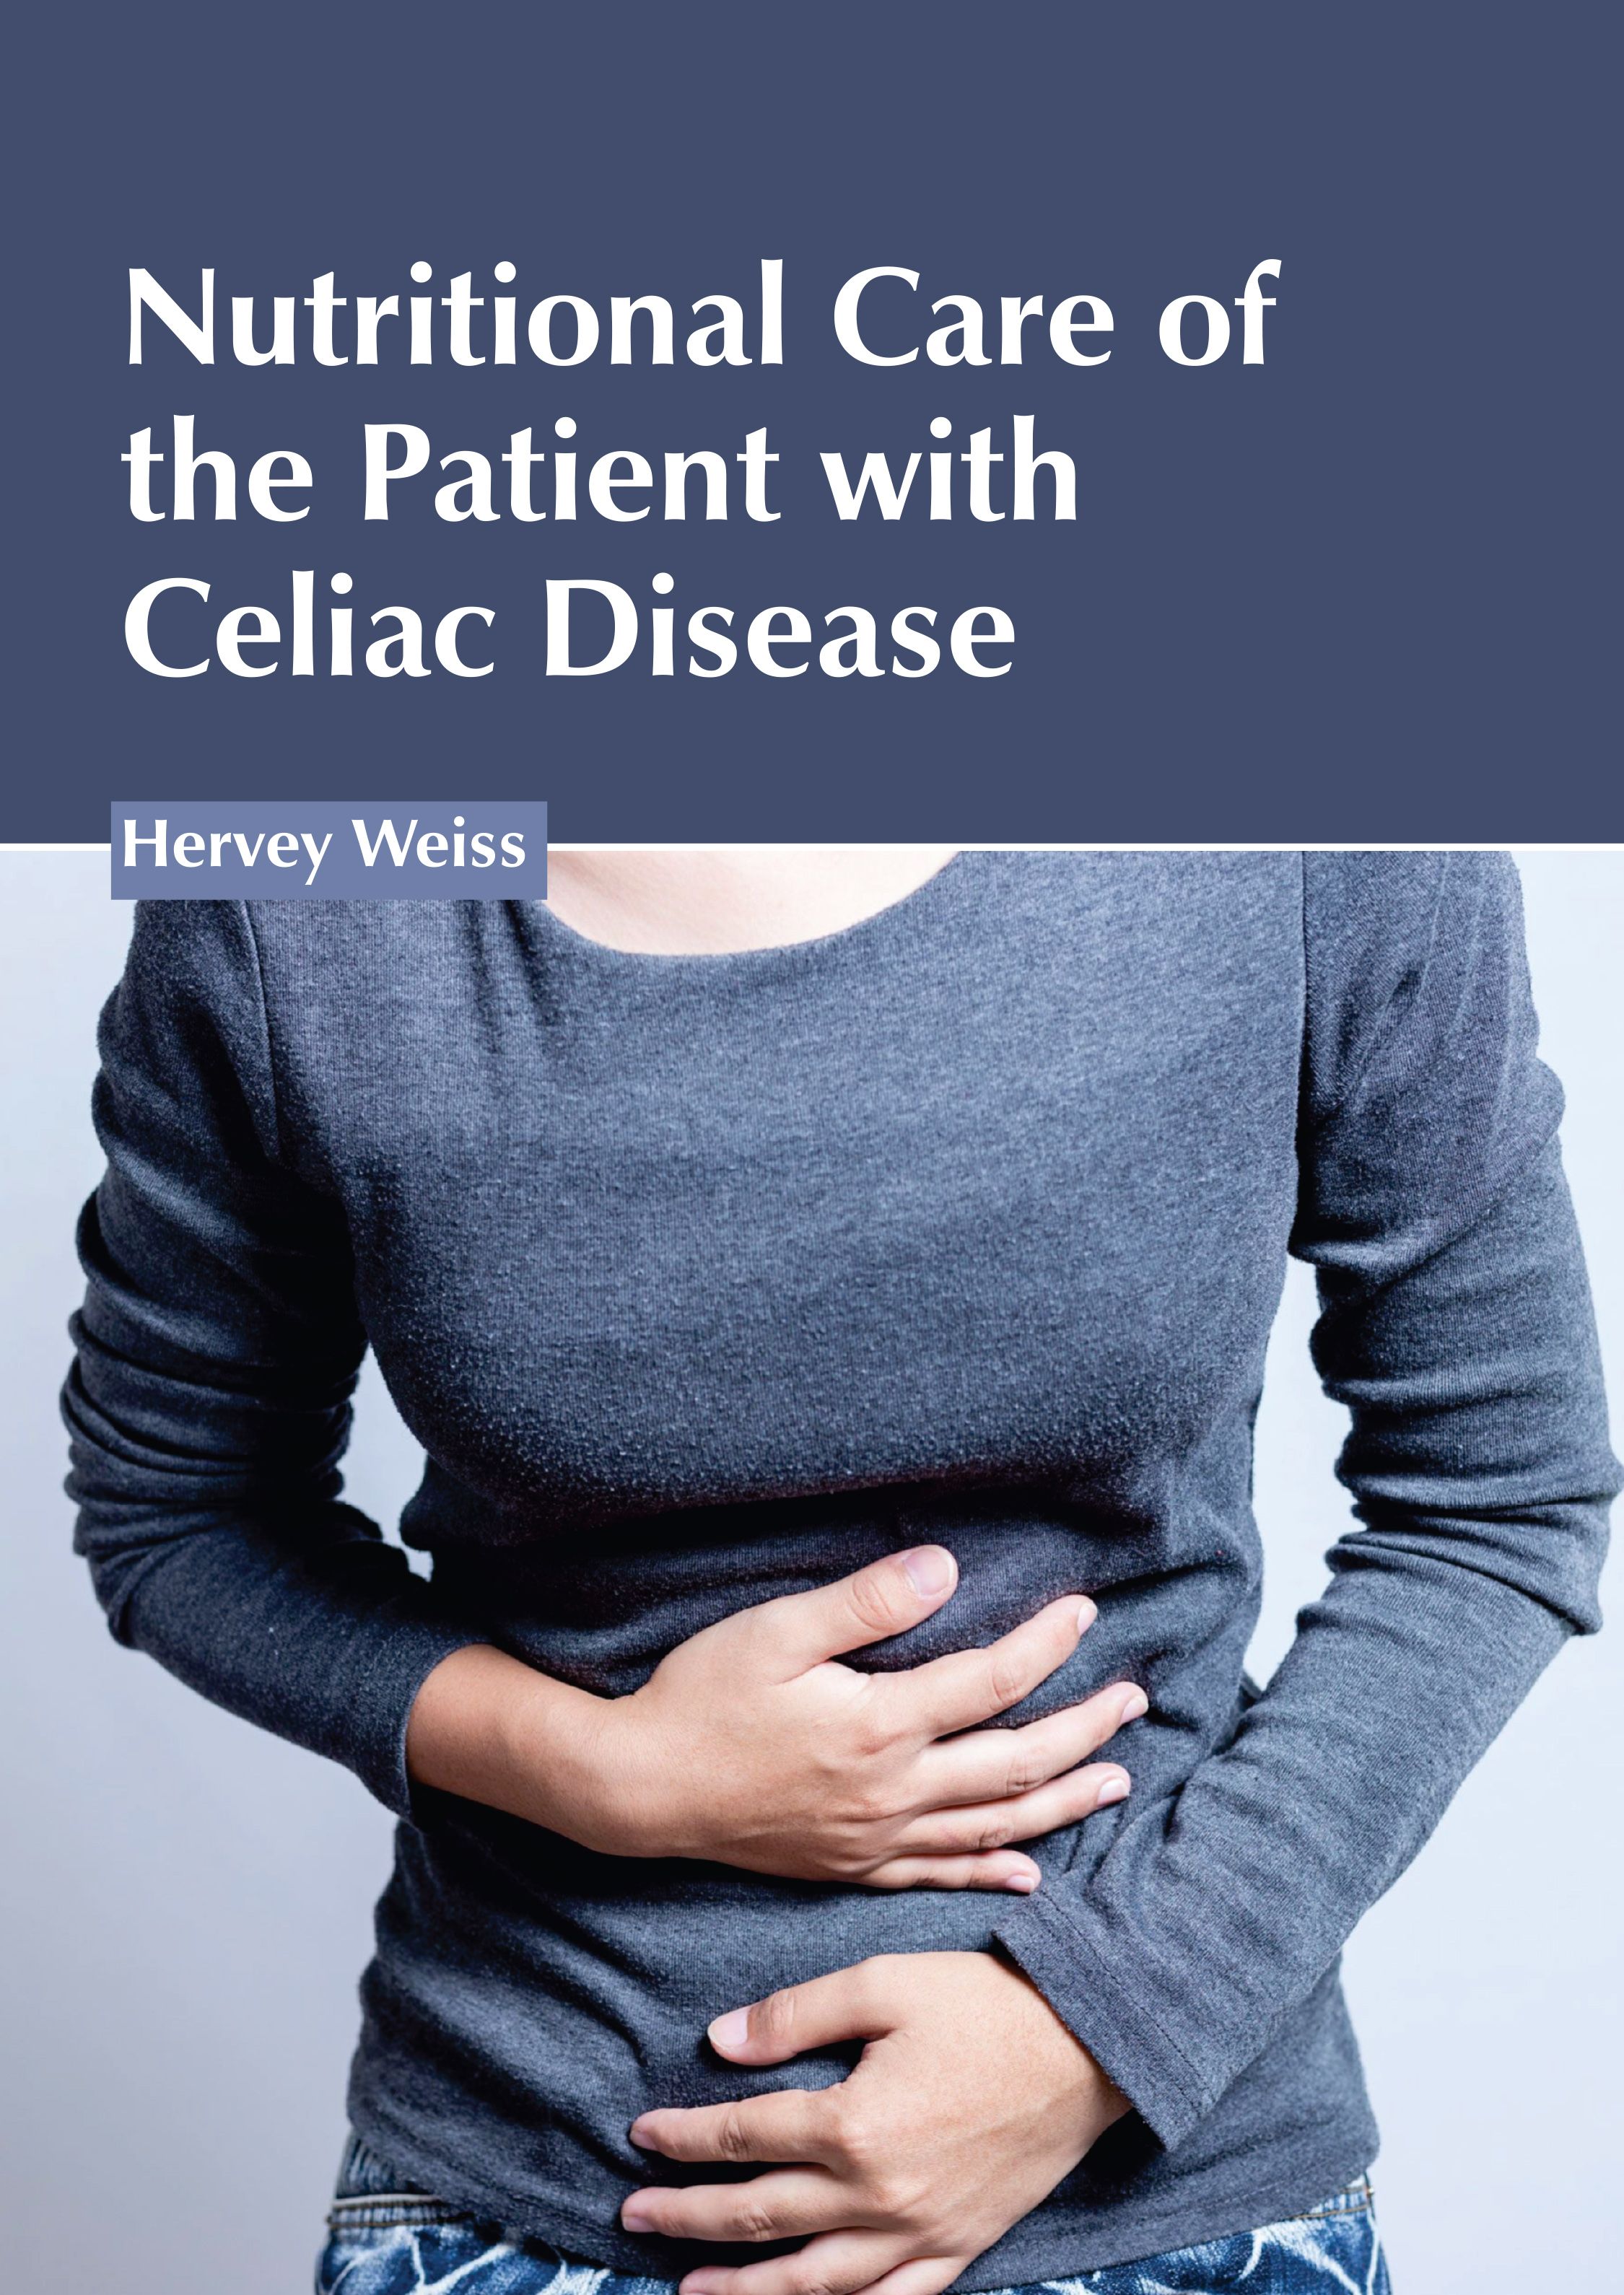 

exclusive-publishers/american-medical-publishers/nutritional-care-of-the-patient-with-celiac-disease-9781639277650